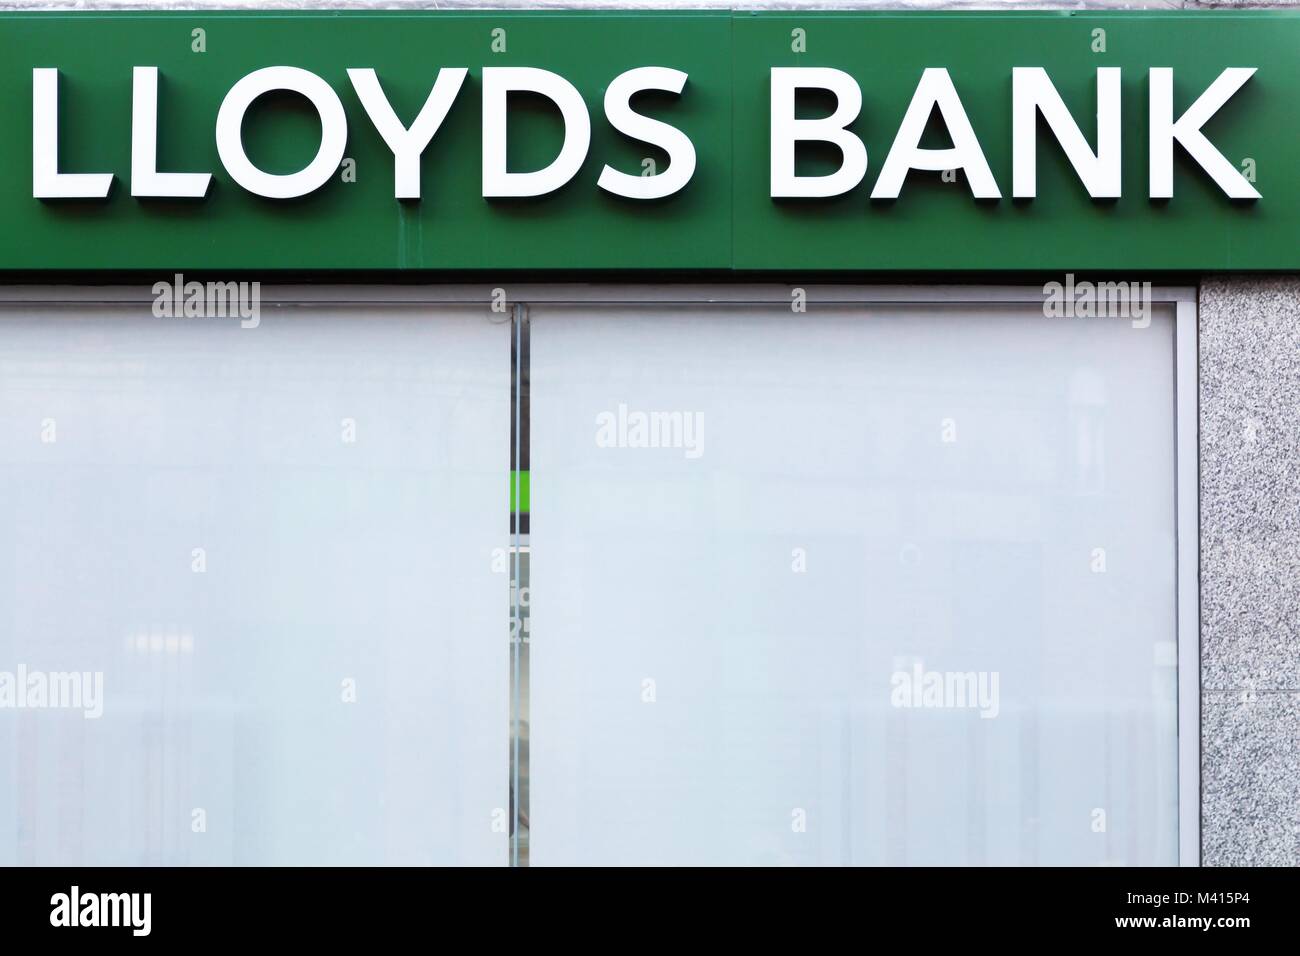 London, United Kingdom - February 1, 2018: Lloyds Bank logo on a wall. Lloyds Bank is the largest retail and commercial bank in Great Britain Stock Photo